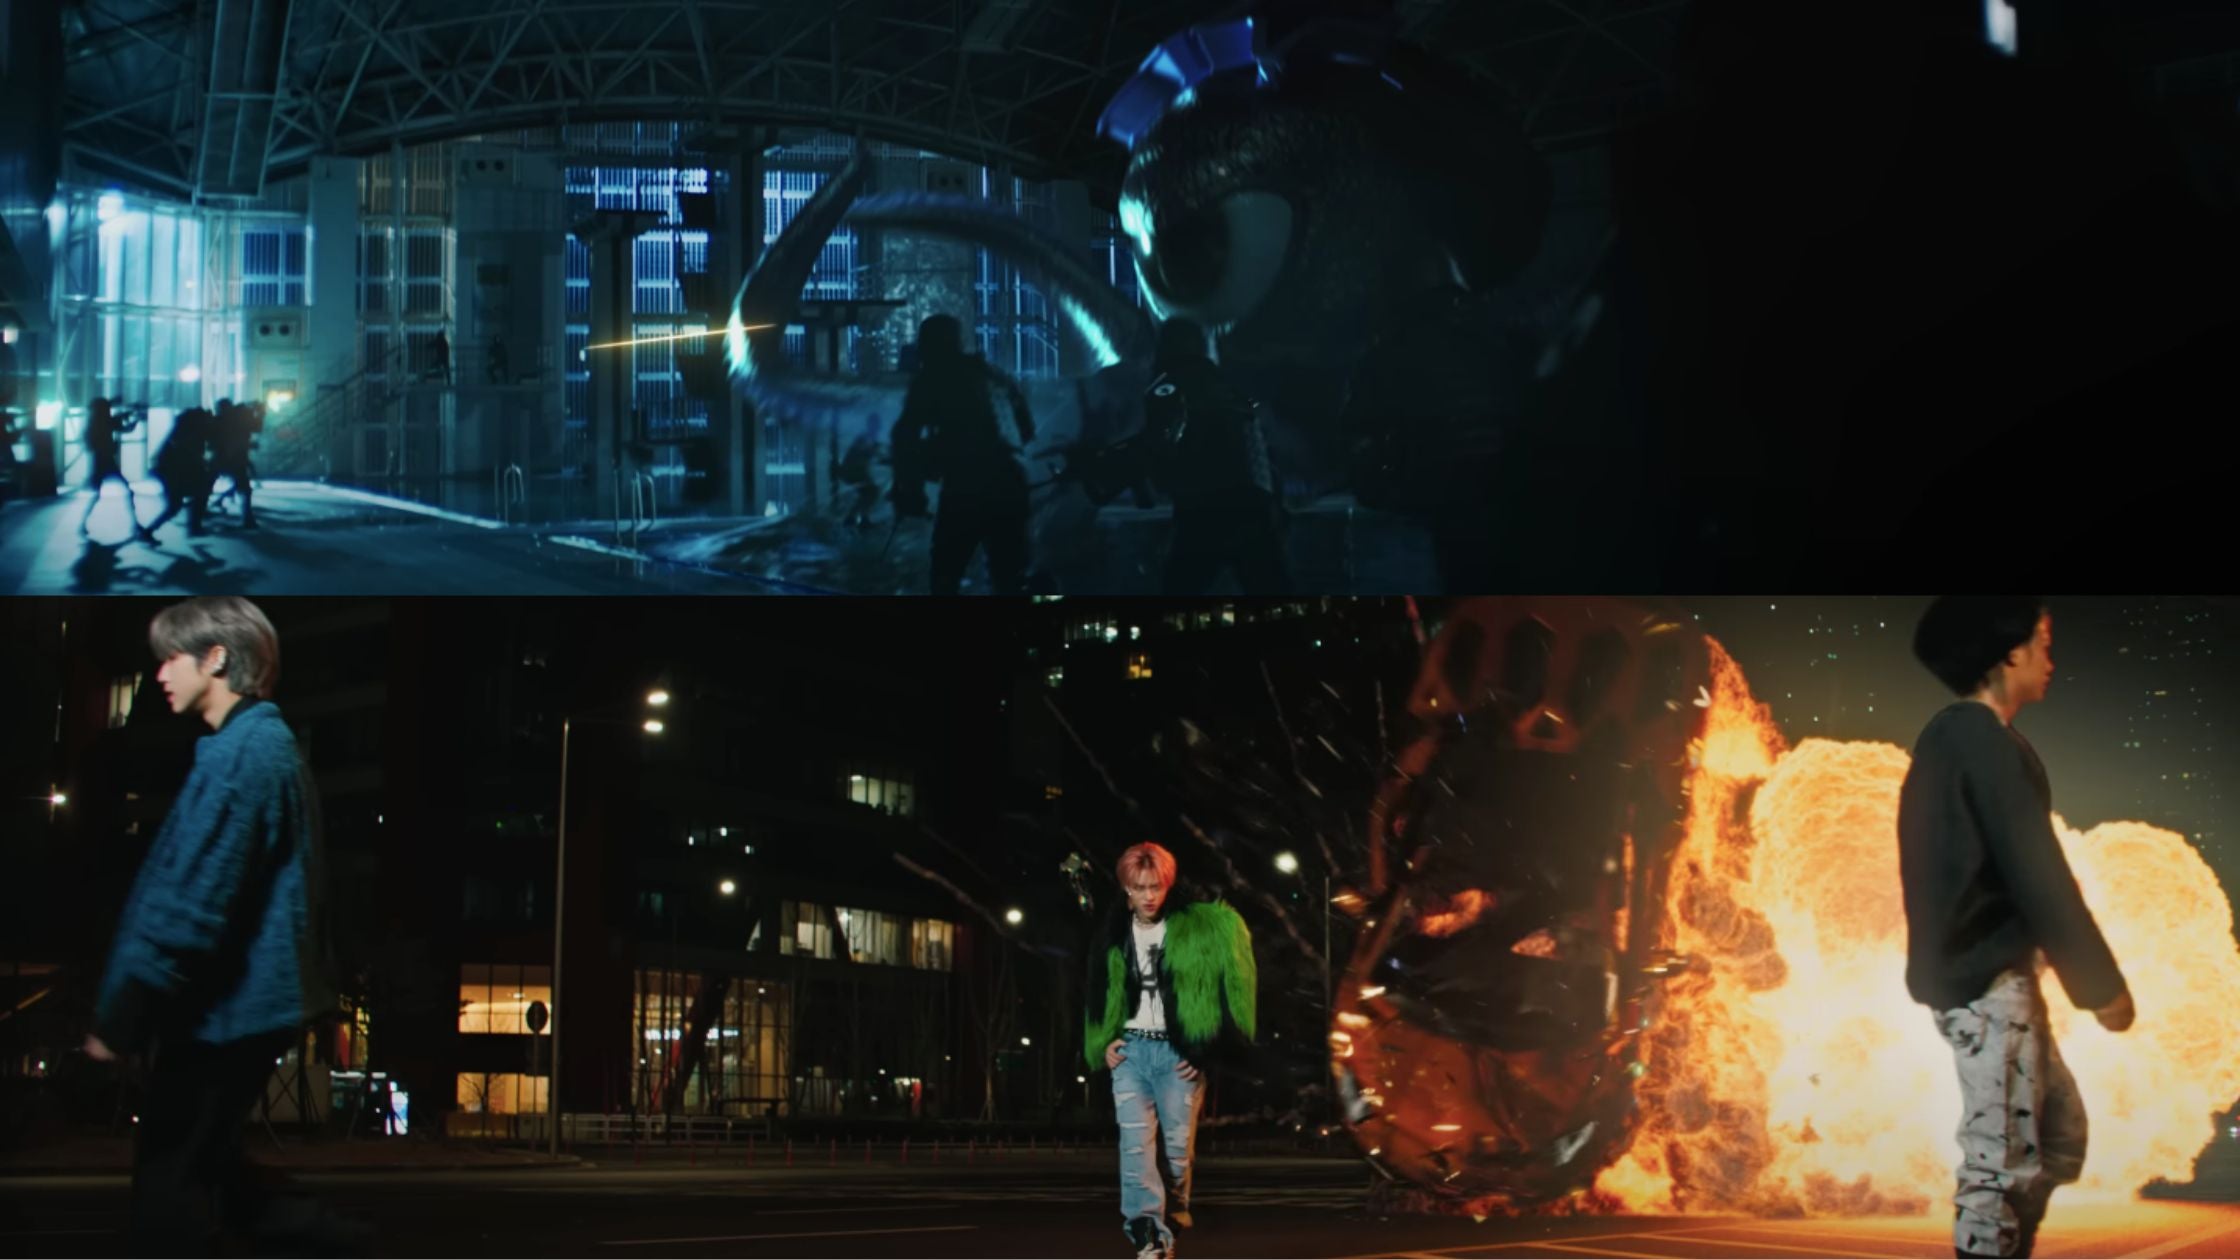 Octopus at a pool fighting soldiers, with a car exploding behind Han and Felix and beside Hyunjin